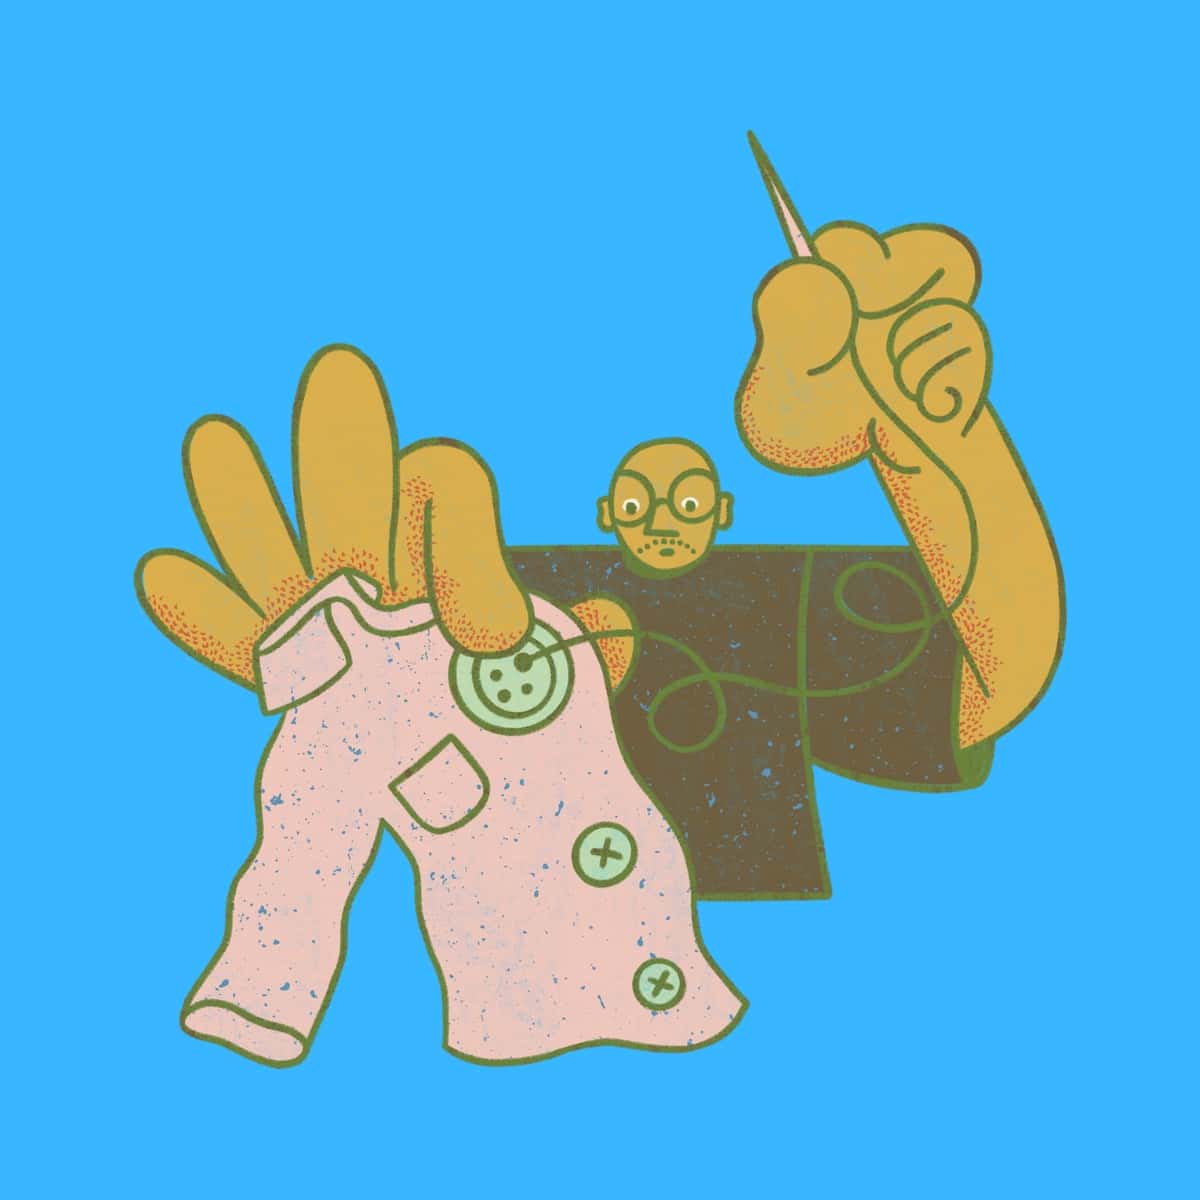 Cartoon graphic of a man sewing a button on a jersey on a blue background.